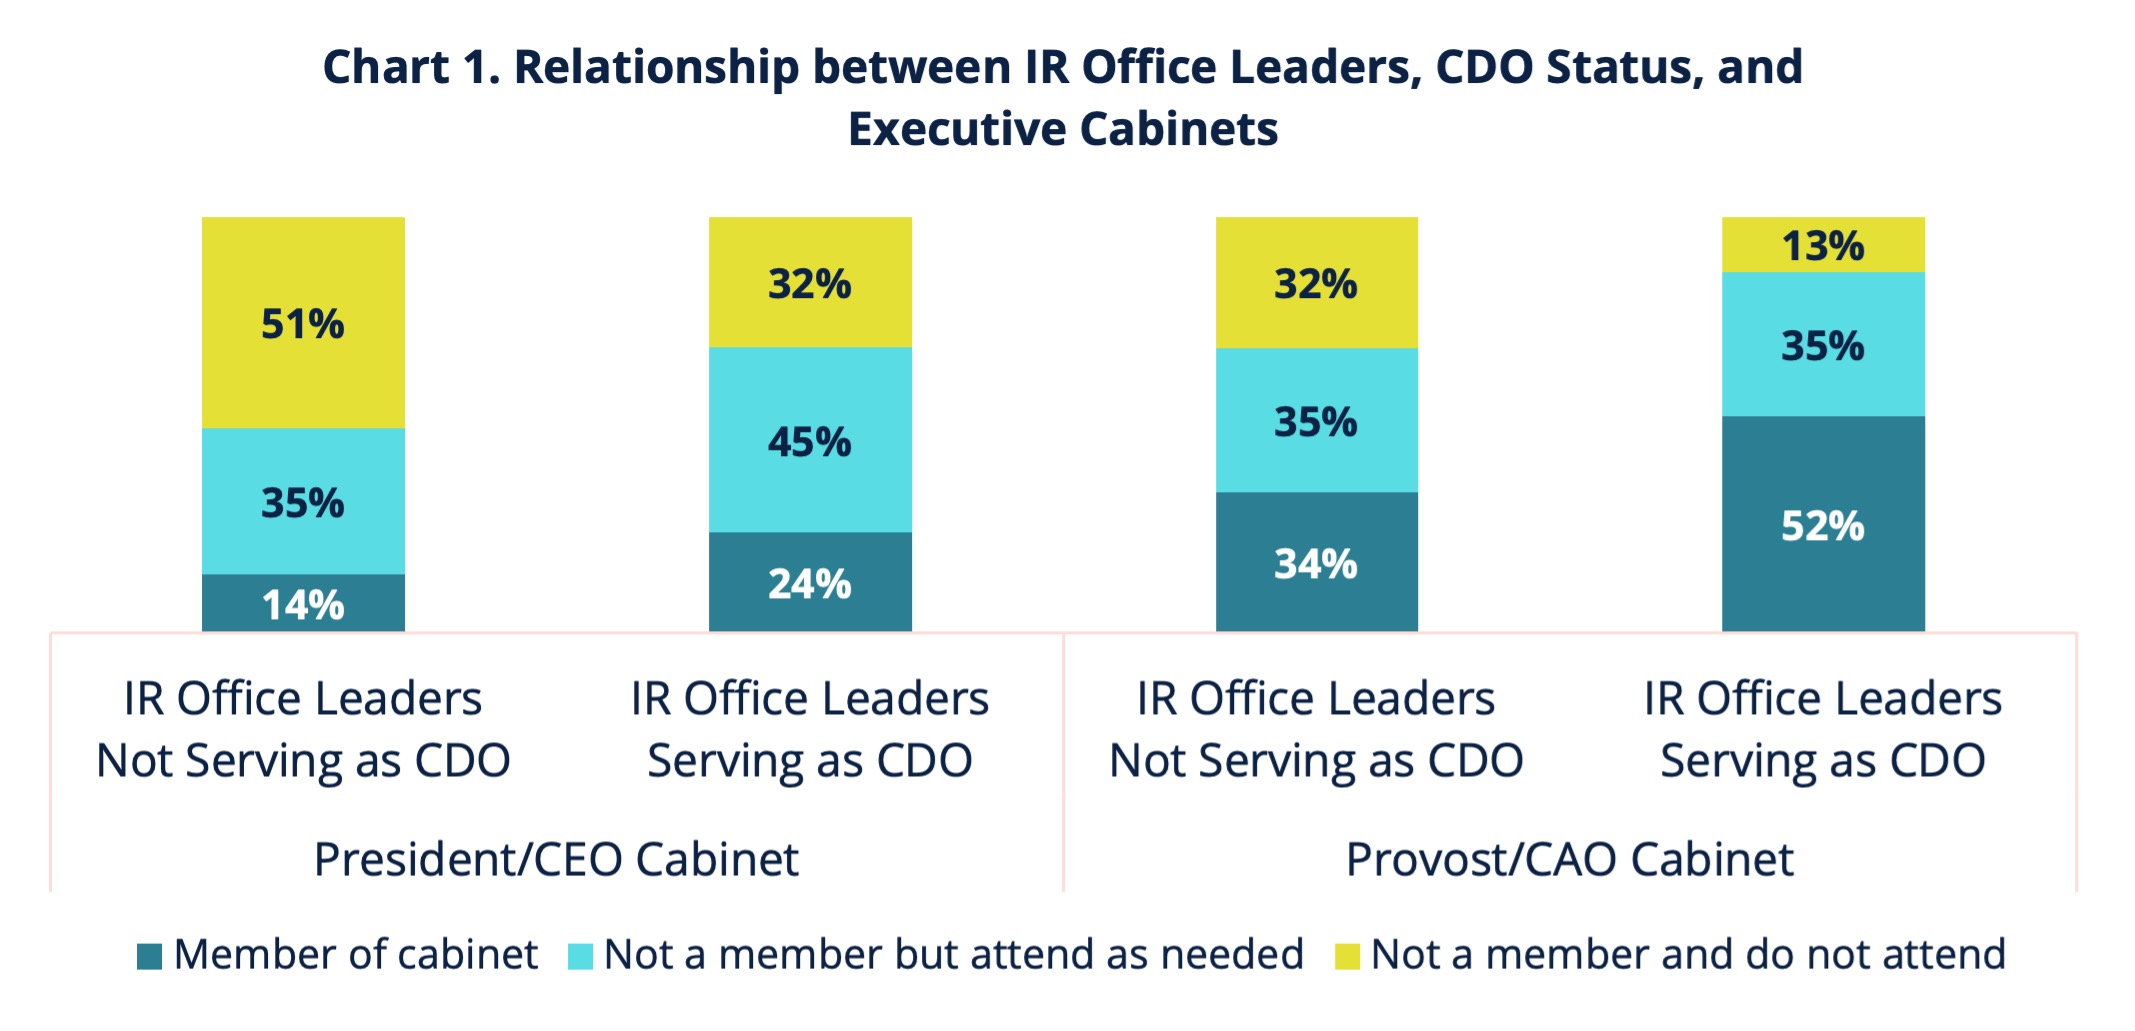 Chart 1. Relationship between IR Office Leaders, CDO Status, and Executive Cabinets
